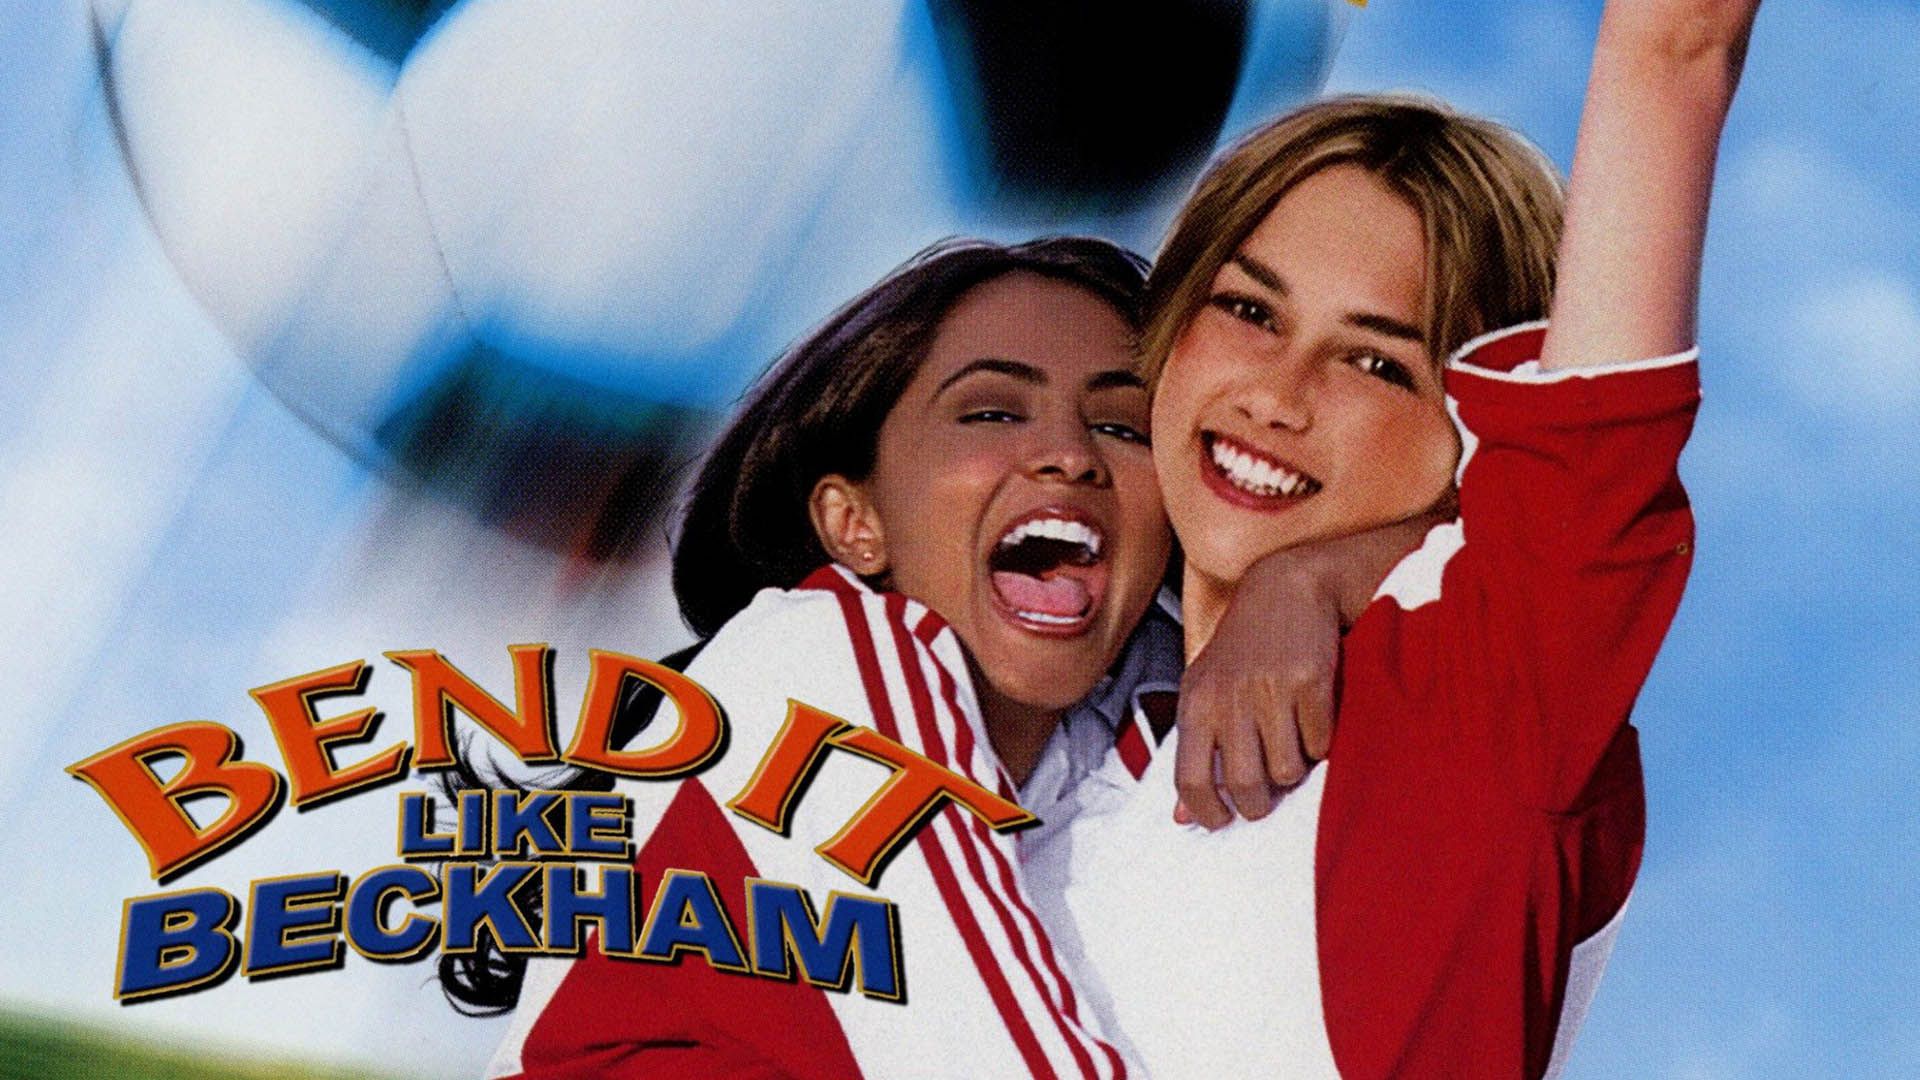 The main characters of Bend It Like Beckham